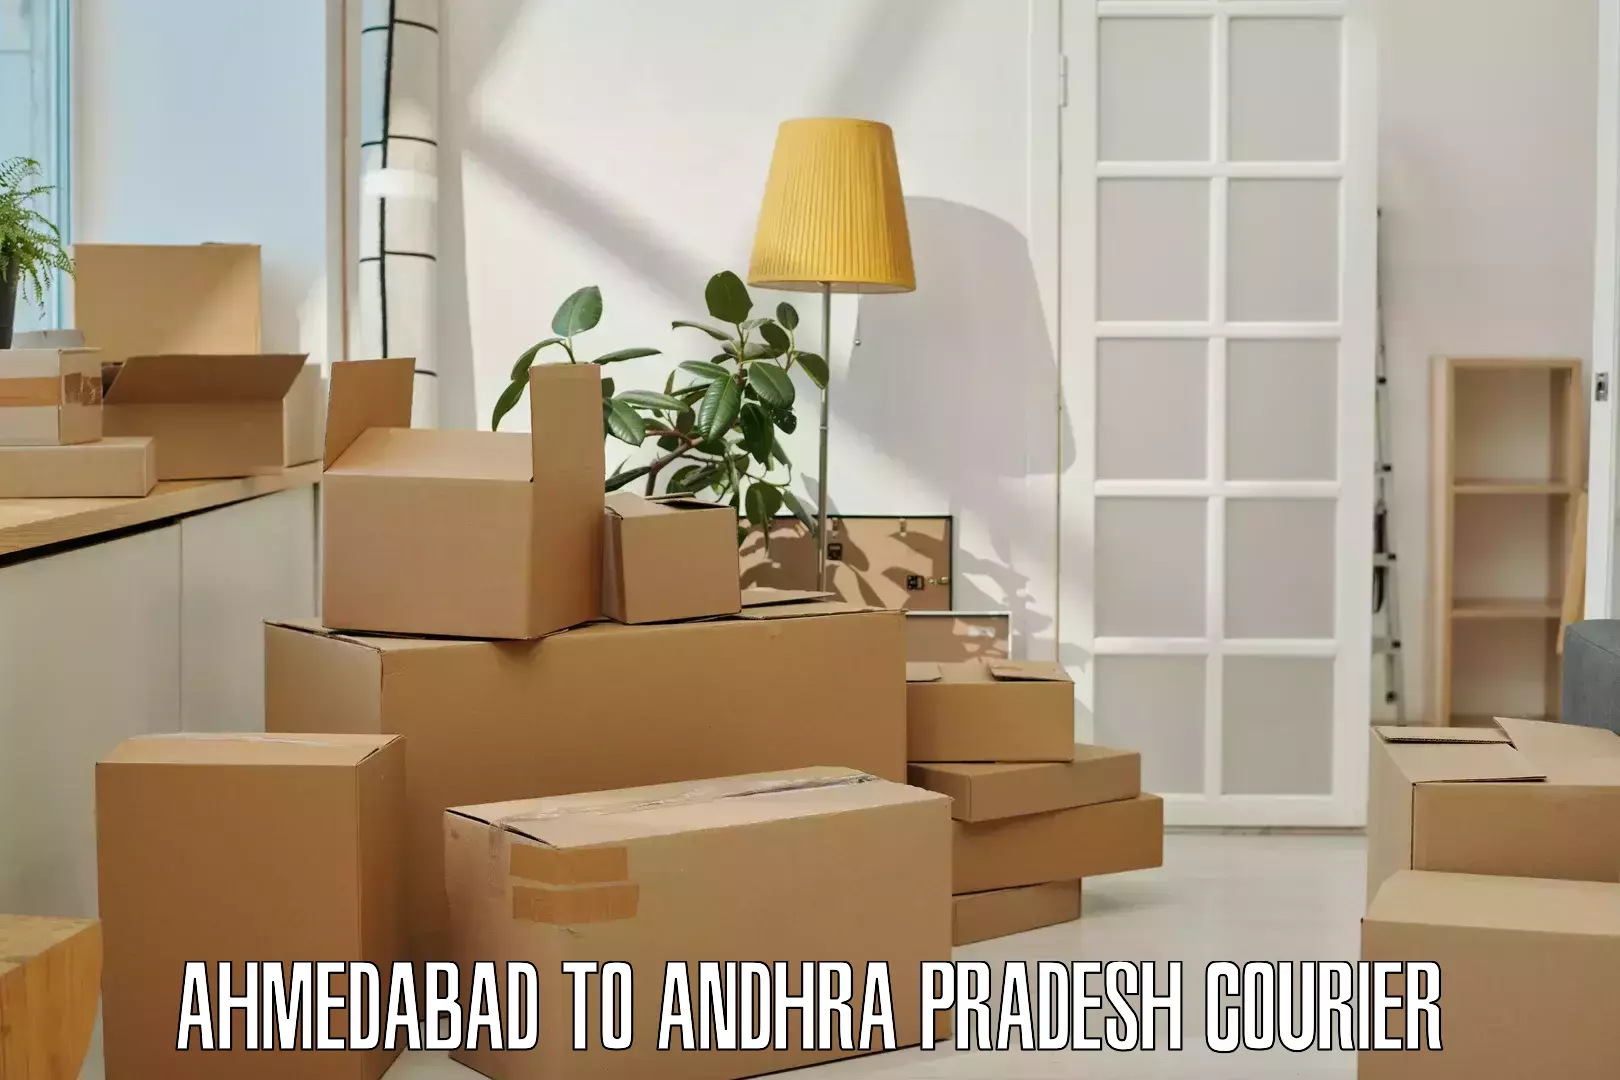 Cash on delivery service Ahmedabad to Tirupati